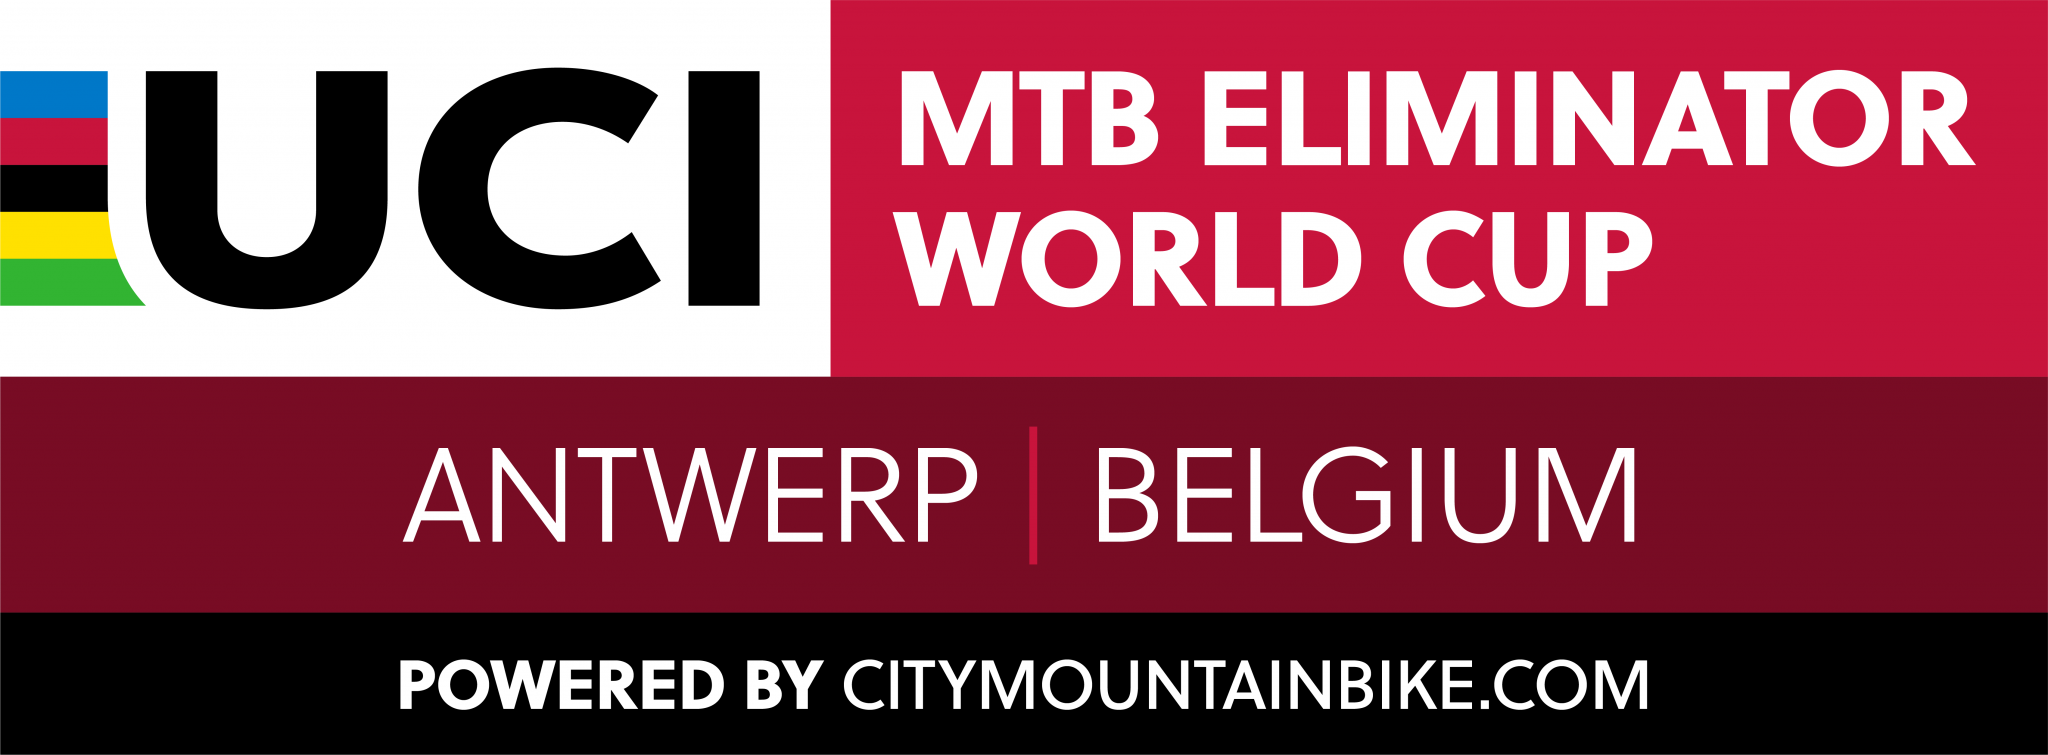 The Mountain Bike Eliminator World Cup is poised to conclude in Antwerp ©UCI